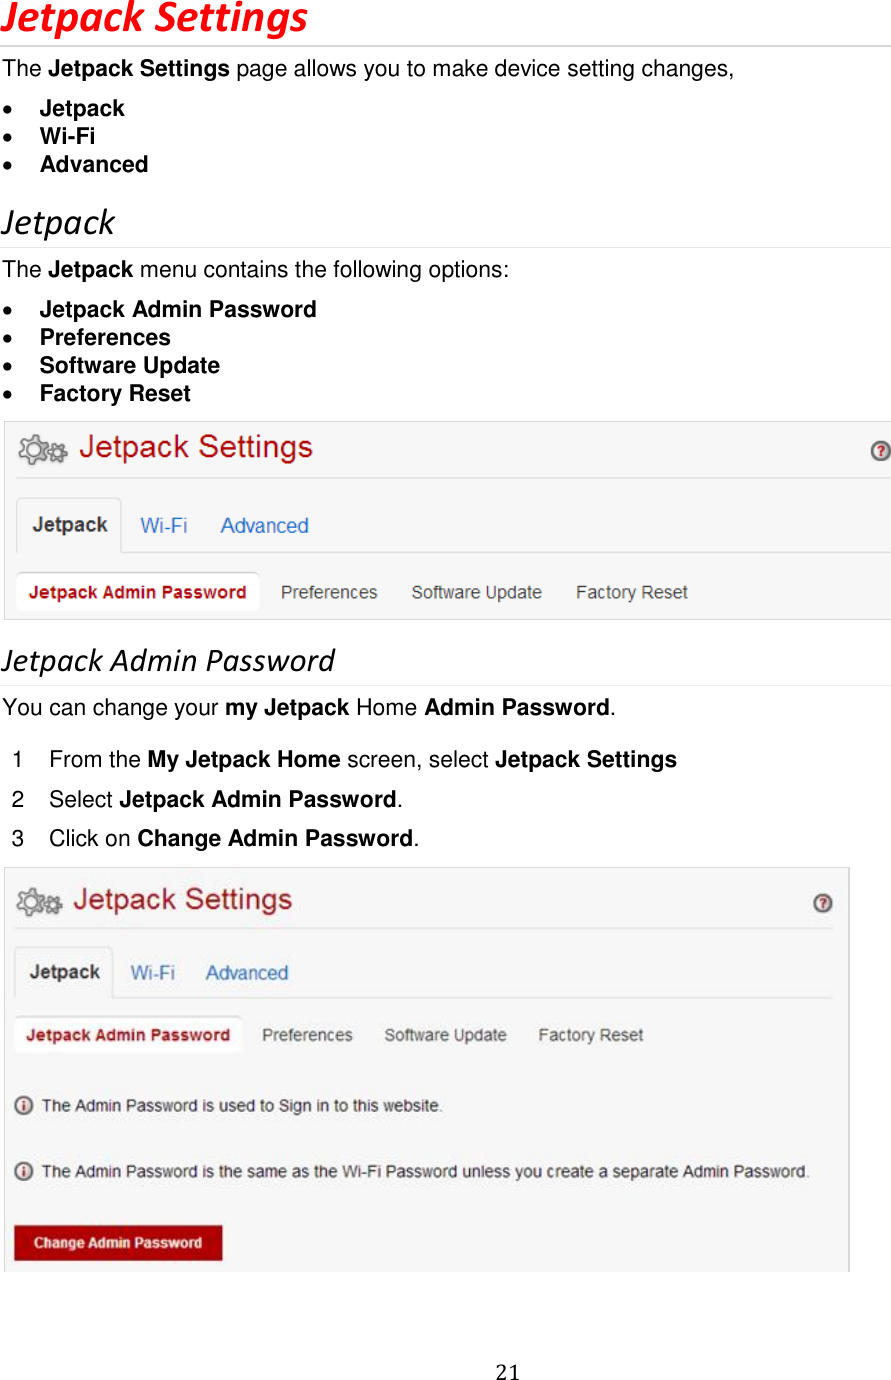   21  Jetpack Settings The Jetpack Settings page allows you to make device setting changes,   Jetpack  Wi-Fi  Advanced Jetpack The Jetpack menu contains the following options:  Jetpack Admin Password   Preferences  Software Update  Factory Reset  Jetpack Admin Password You can change your my Jetpack Home Admin Password.  1  From the My Jetpack Home screen, select Jetpack Settings 2  Select Jetpack Admin Password. 3  Click on Change Admin Password.  